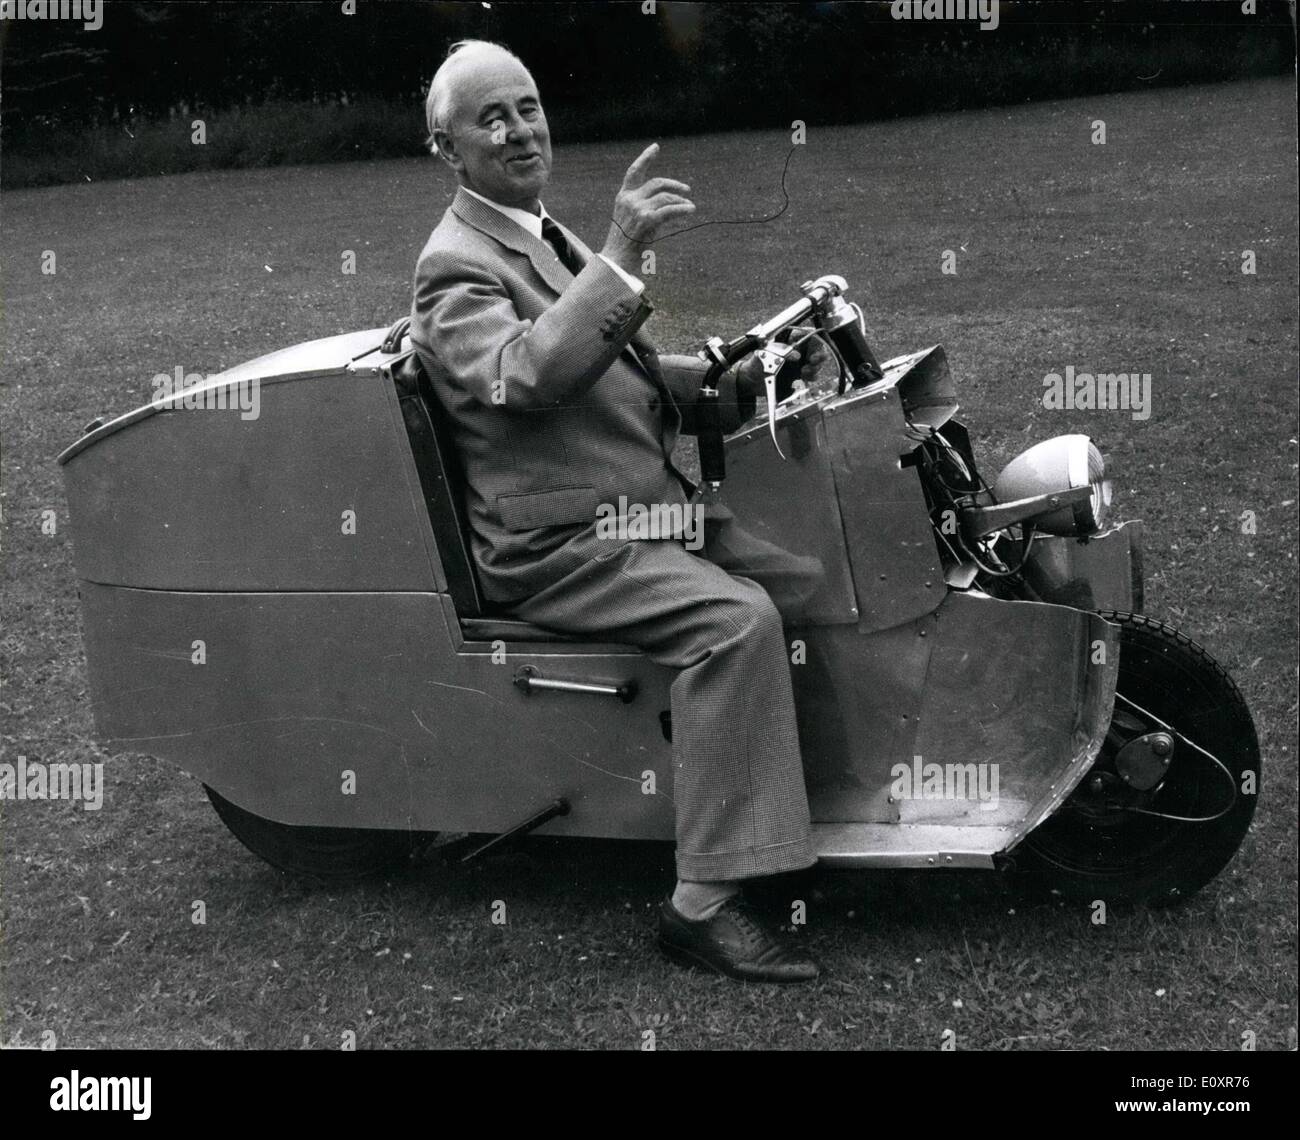 Aug. 08, 1967 - 80-year old Sir Alliot Roe Designs a ''Car on two wheels''. : 80-year old Sir Alliott Verdon-Roe, co-founder with his brother of the famous A.V. roe aircraft firm, and the first to fly in Britain 49 years ago - has invented a shaft-driven 'armchair'' motor scooter, which will be Britain's answer to the invasion of foreign machines. Sir Alliott says it's the nearest thing to a car on two wheels. The 60 m.p.h. Avle Biar has its driving seat situated between the wheels and not over the back wheel as on standard scooters - and is about a foot lower Stock Photo